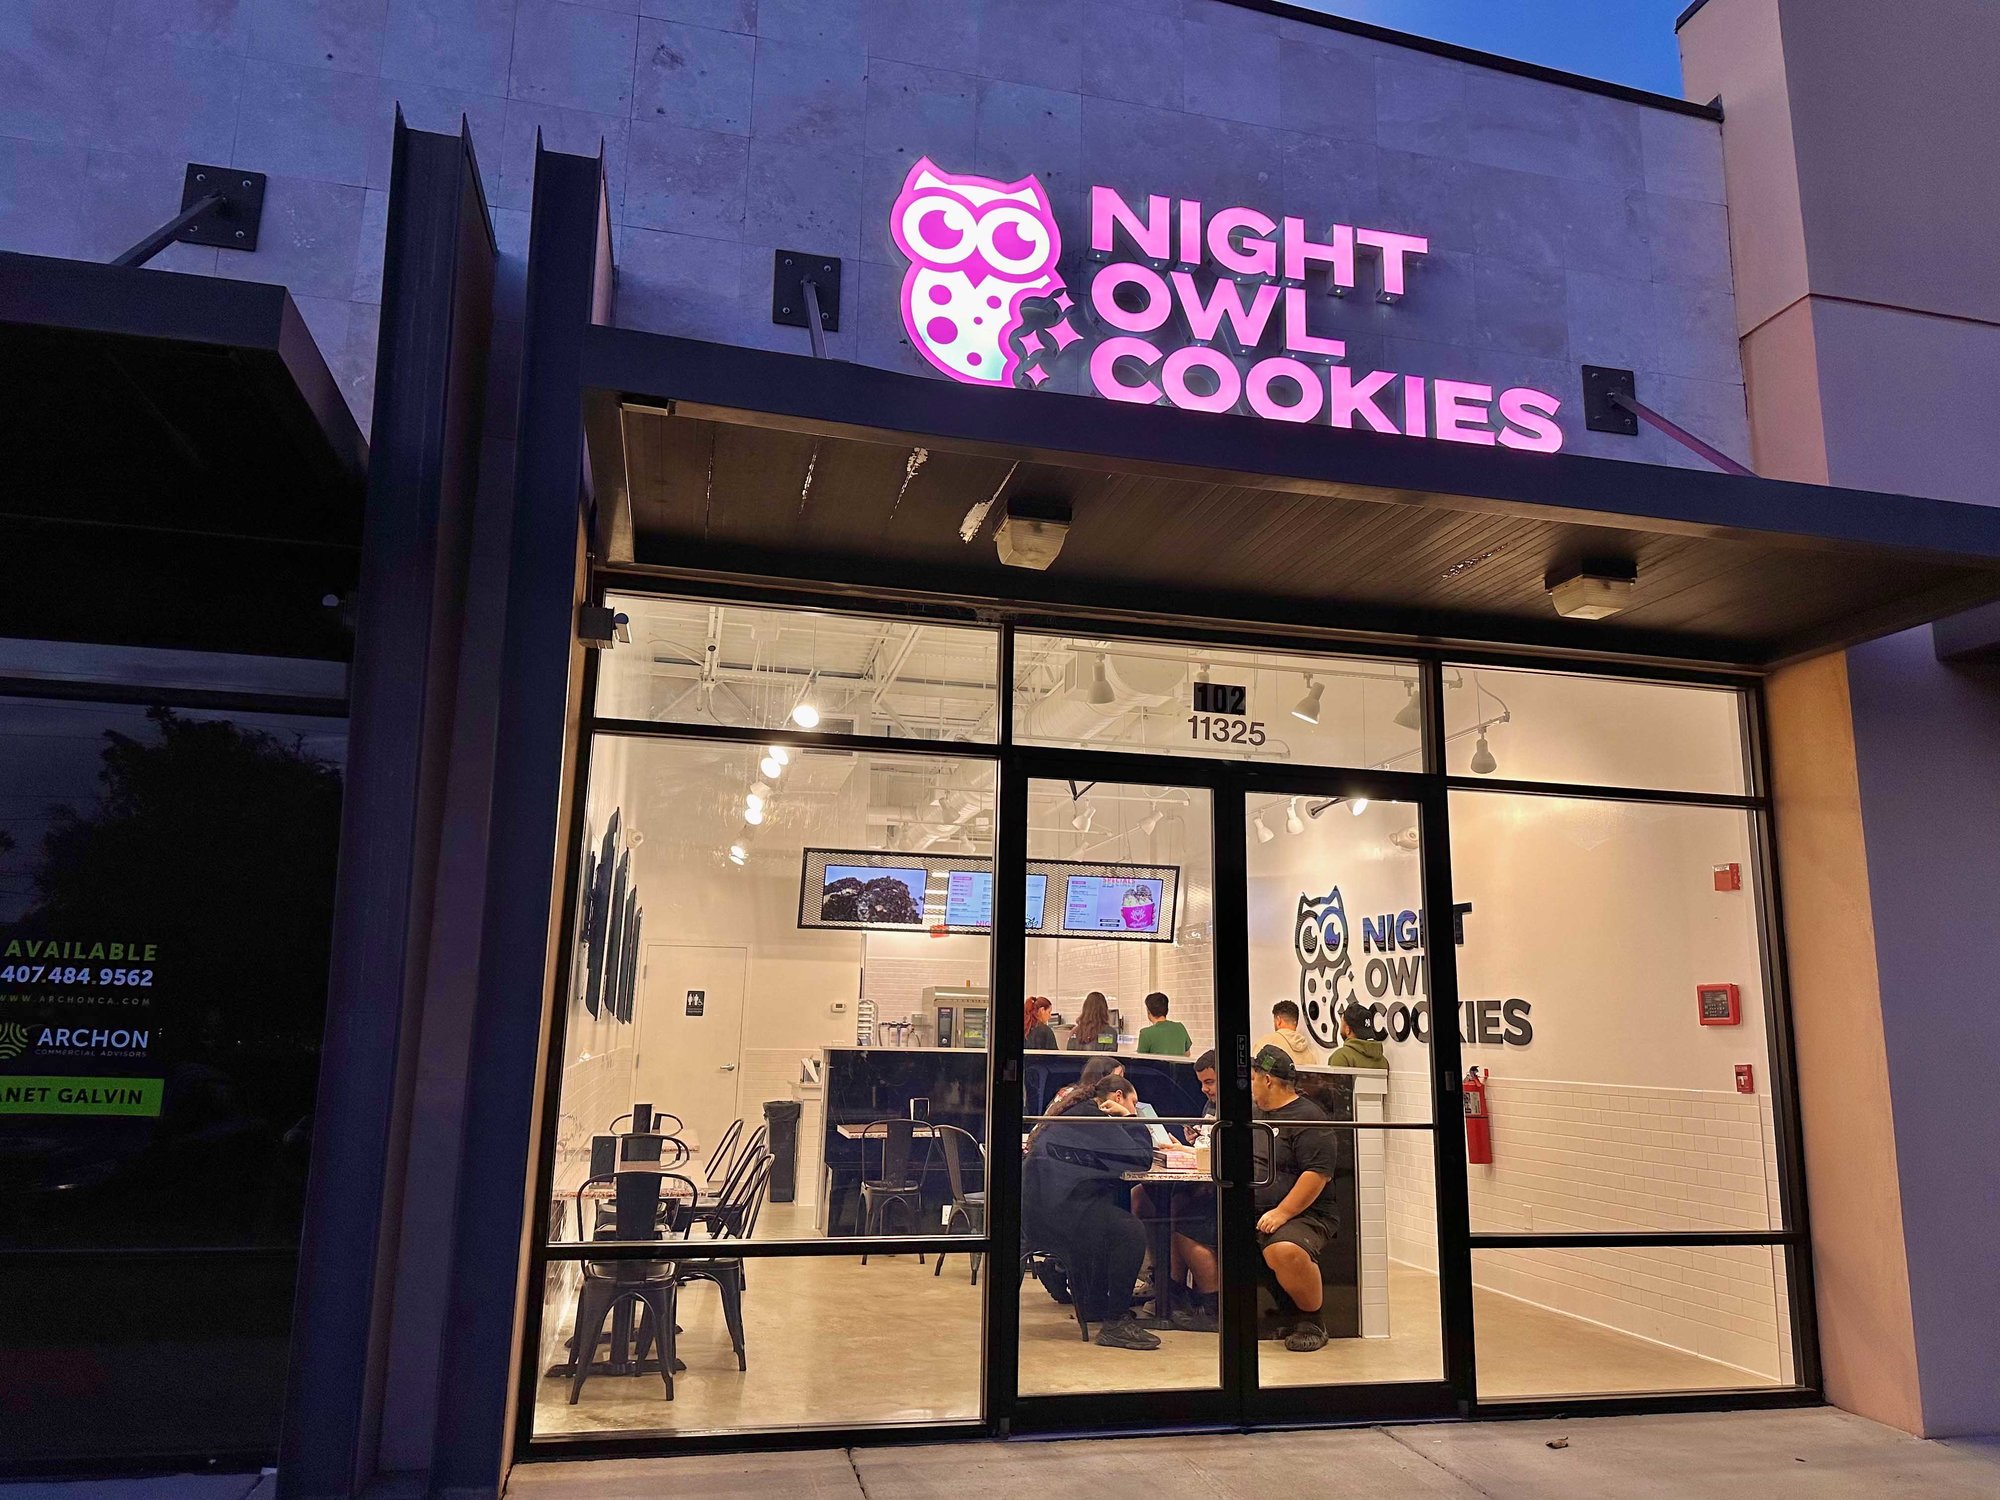 outside of the night owl cookies building with pink lettering